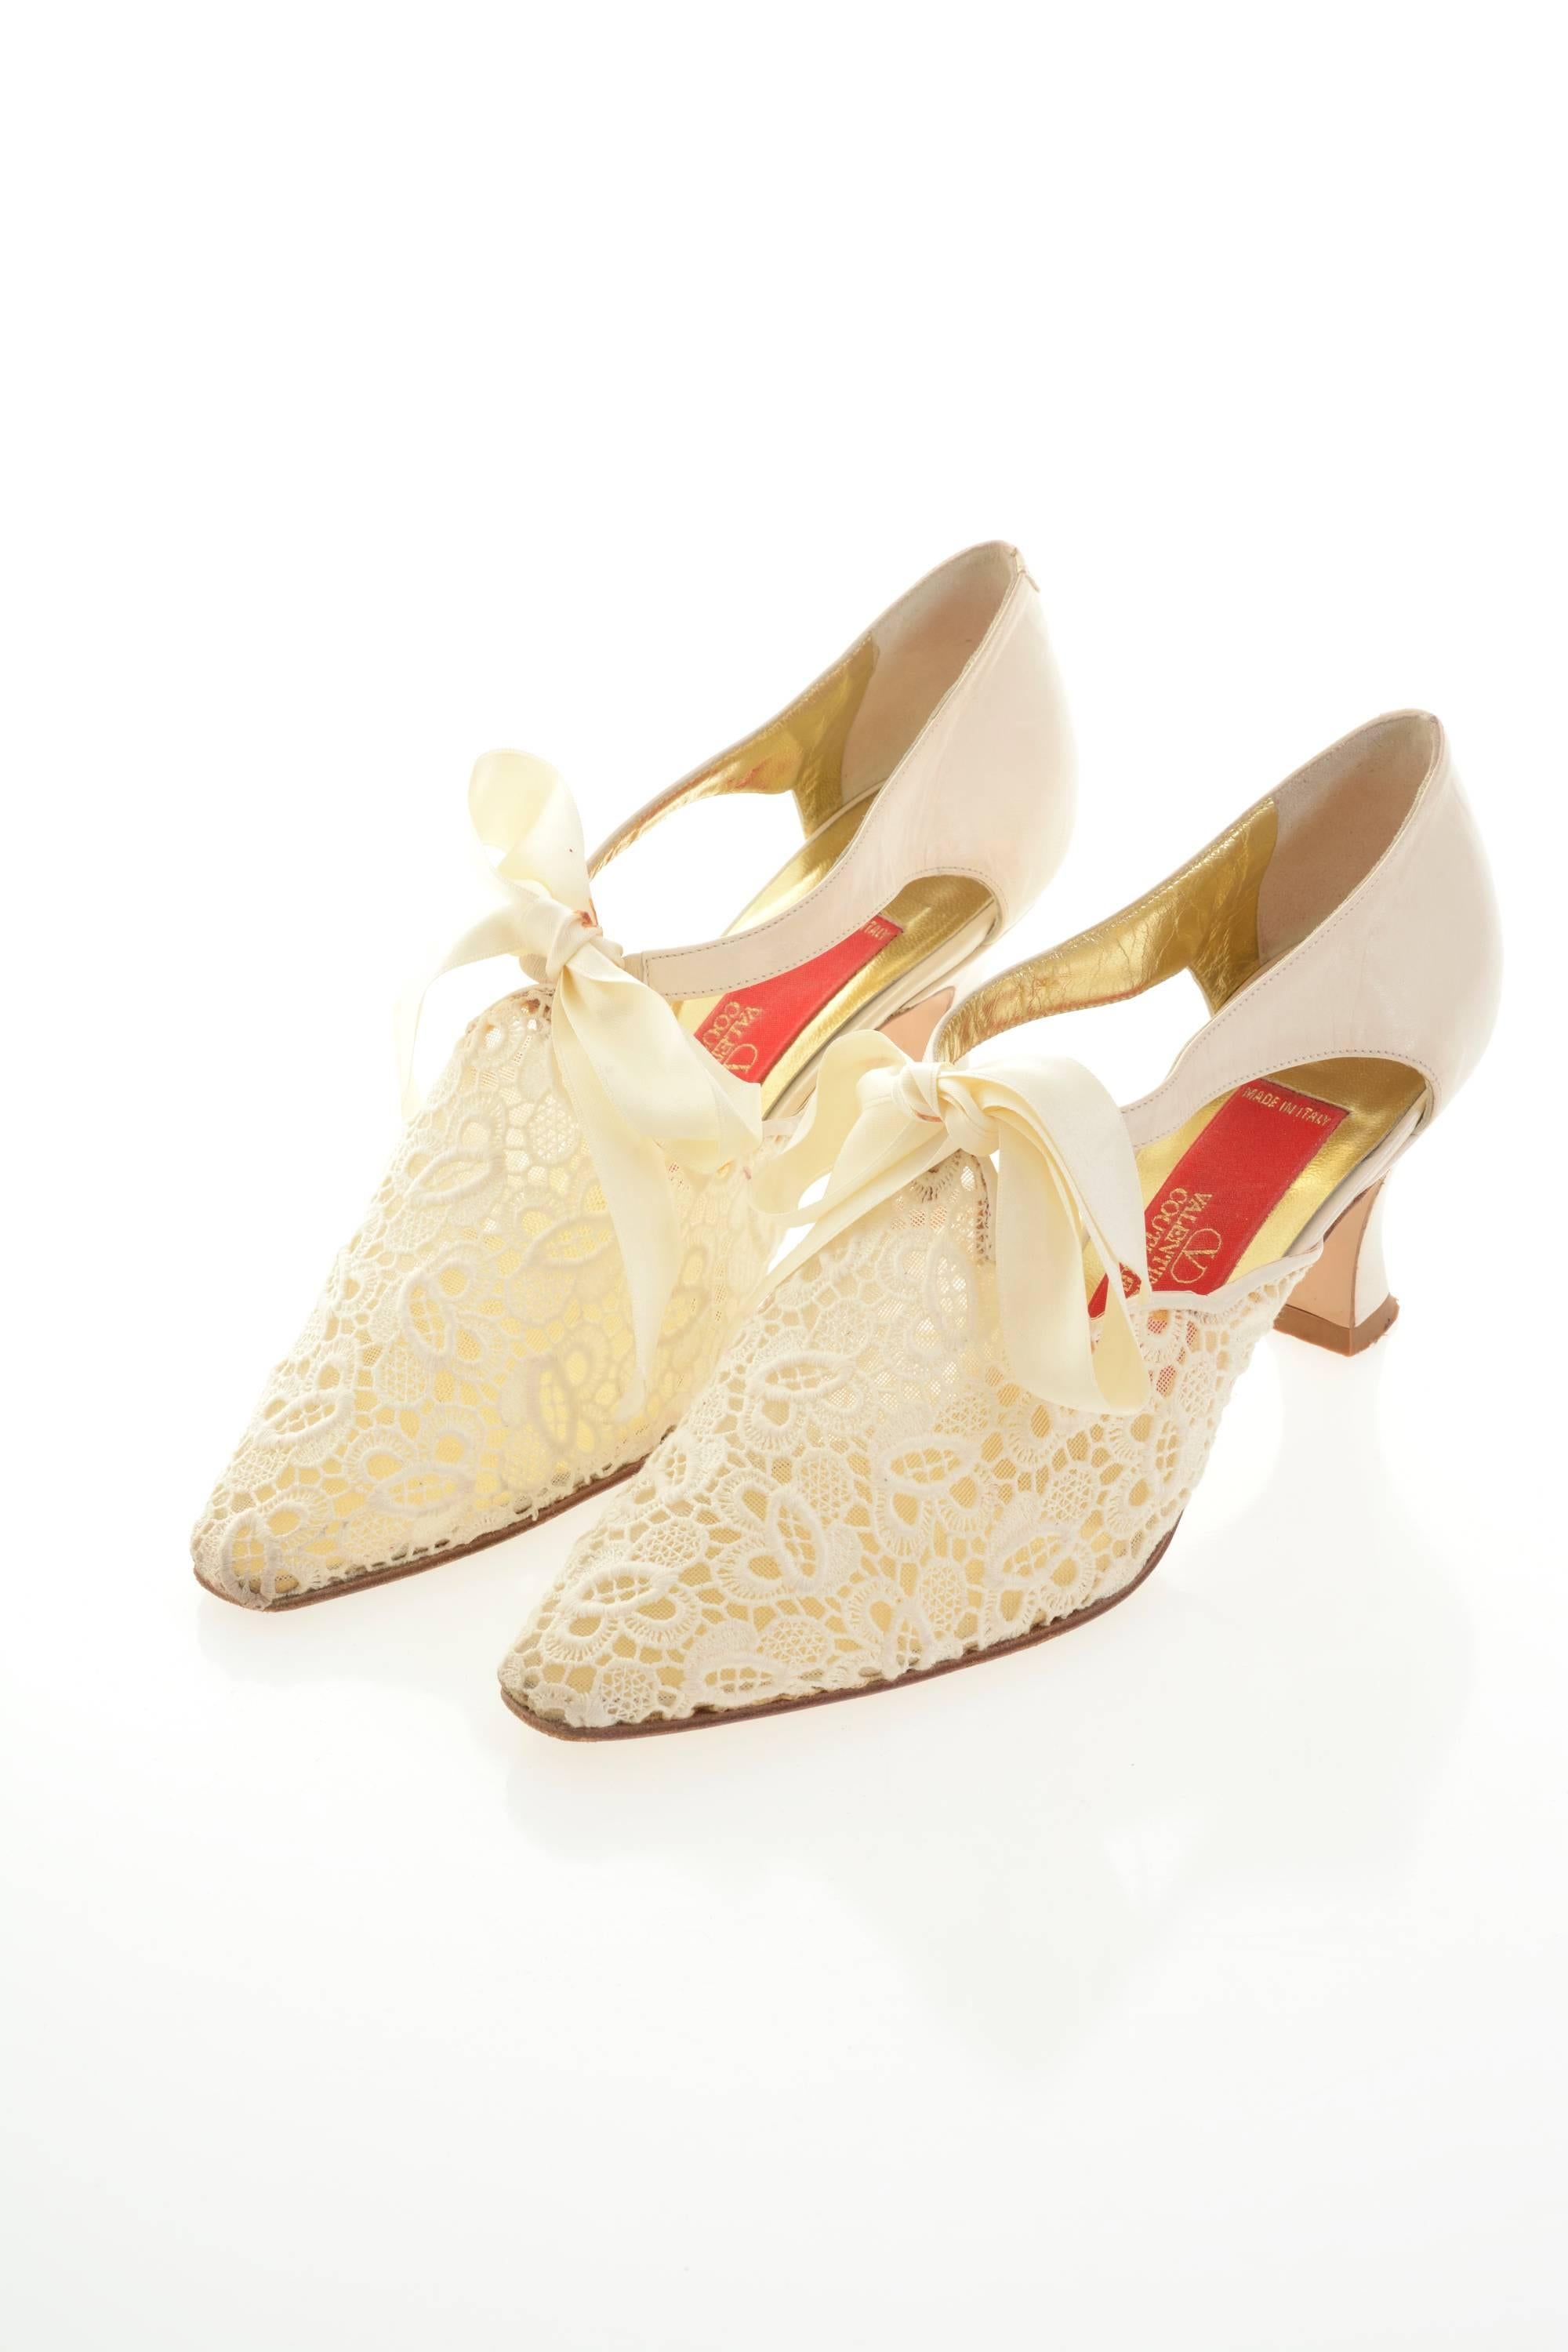 These gorgeous Valentino Couture italian stiletto shoes are made with a white pearl lace fabric and leather. They are satin tie lace up, golden leather insole and white perl heel. 

Good vintage condition

Brand: Valentino Couture - Made in